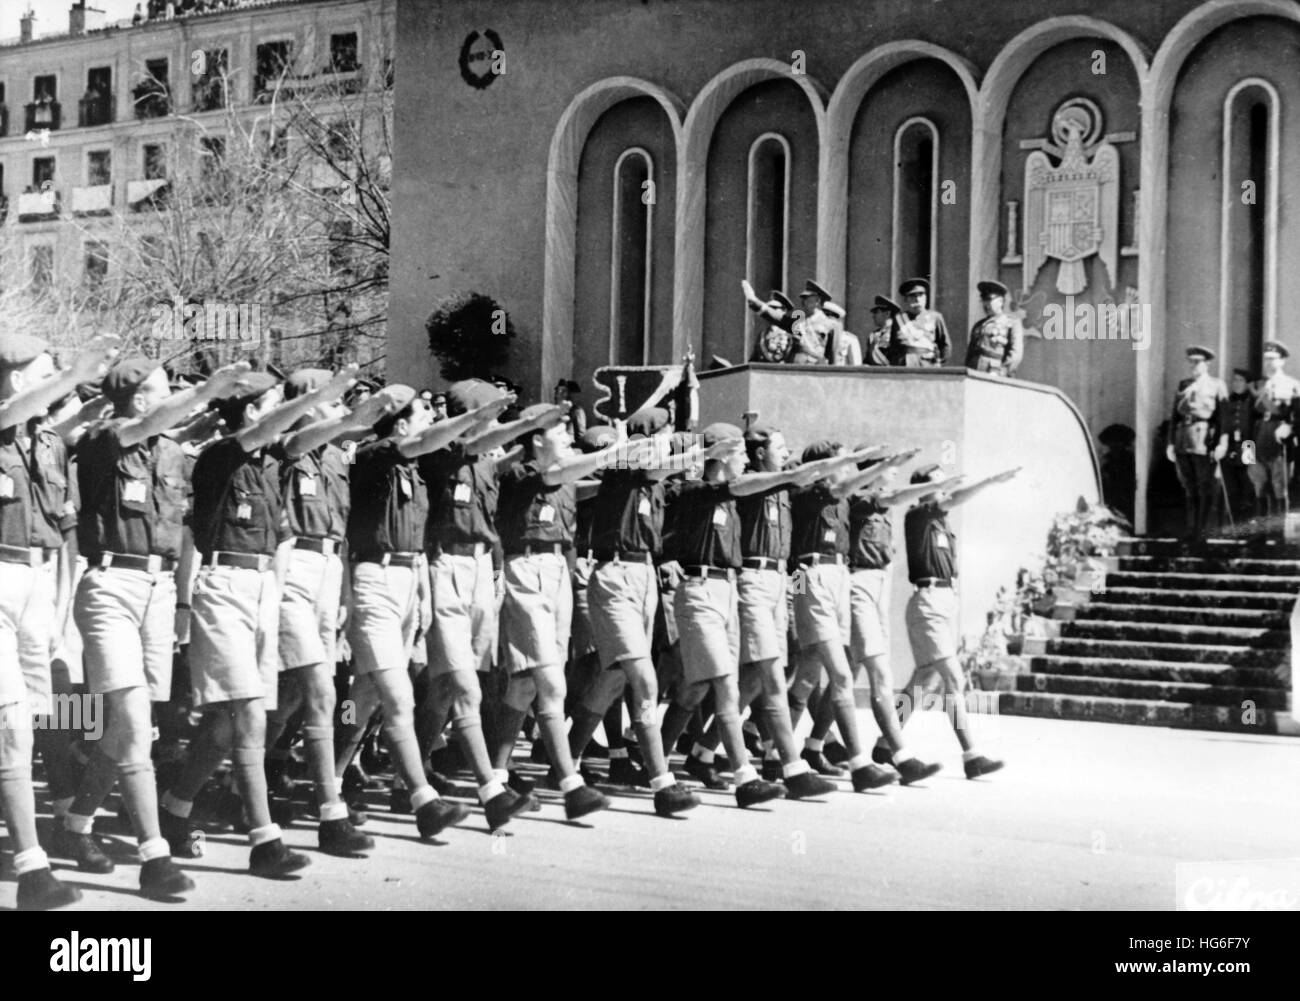 The Nazi propaganda picture shows the march of the fascist Falange Youth Movement in front of Spanish dictator Francisco Franco on a parade honoring the fourth anniversary of the victory of Francos troops during the Spanish Civil War in Madrid, Spain, 01 April 1943. Fotoarchiv für Zeitgeschichtee - NO WIRE SERVICE - | usage worldwide Stock Photo